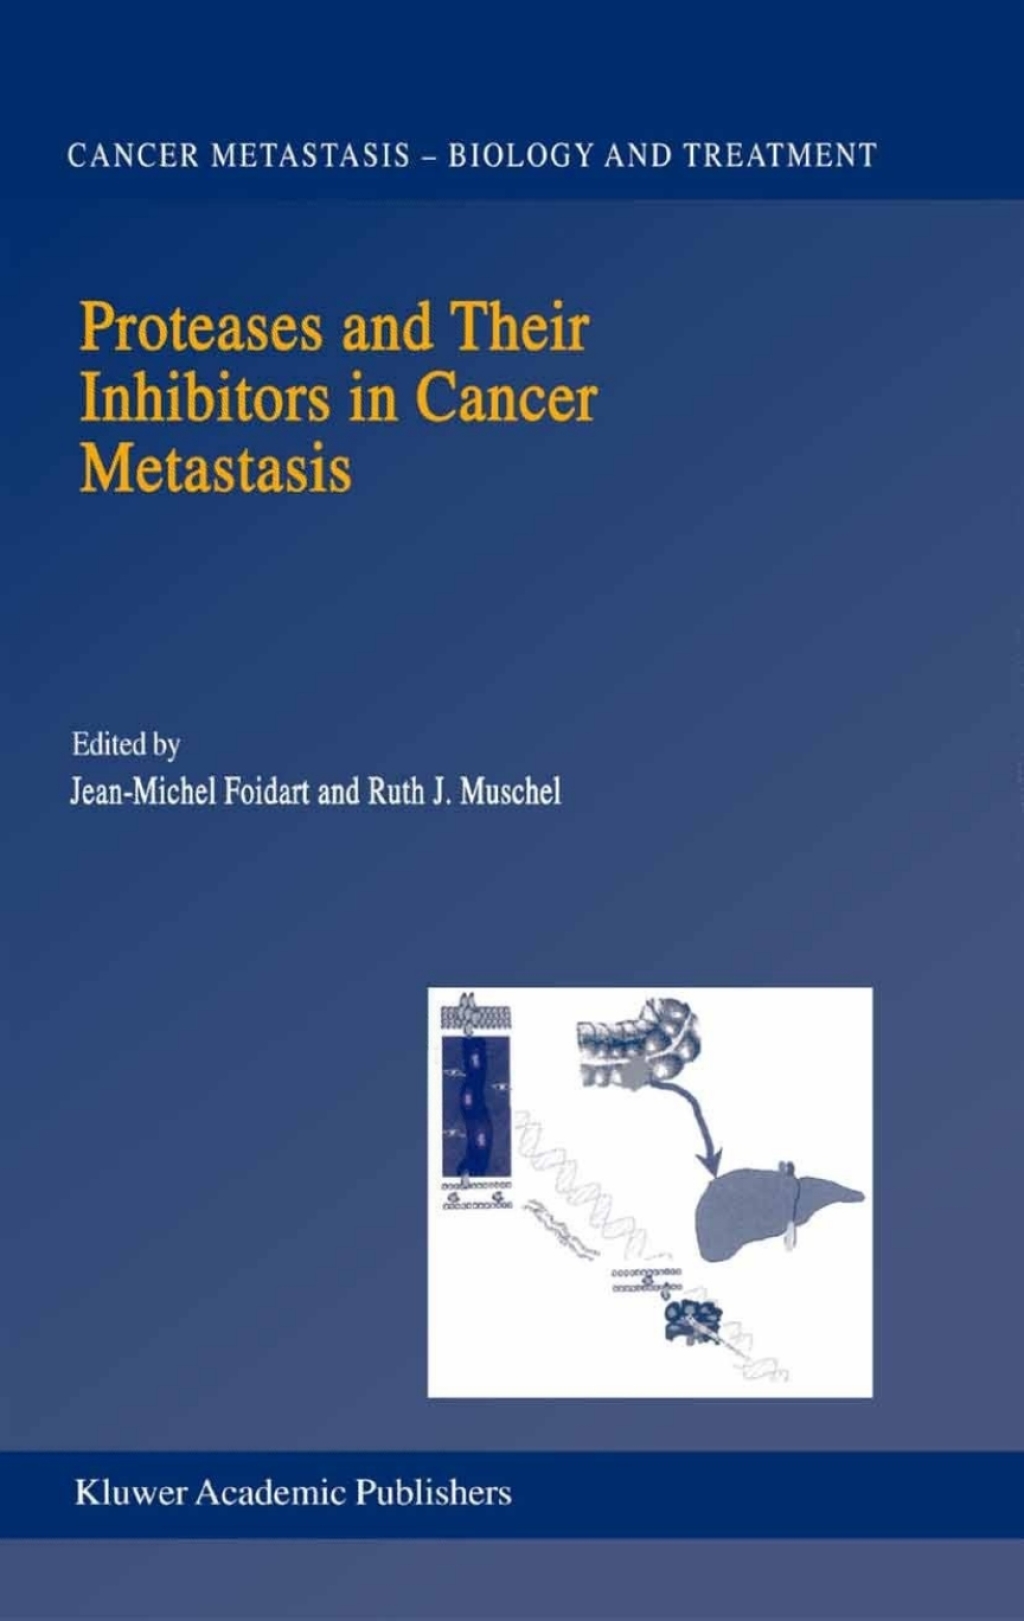 Proteases and Their Inhibitors in Cancer Metastasis (eBook) - J-M. Foidart